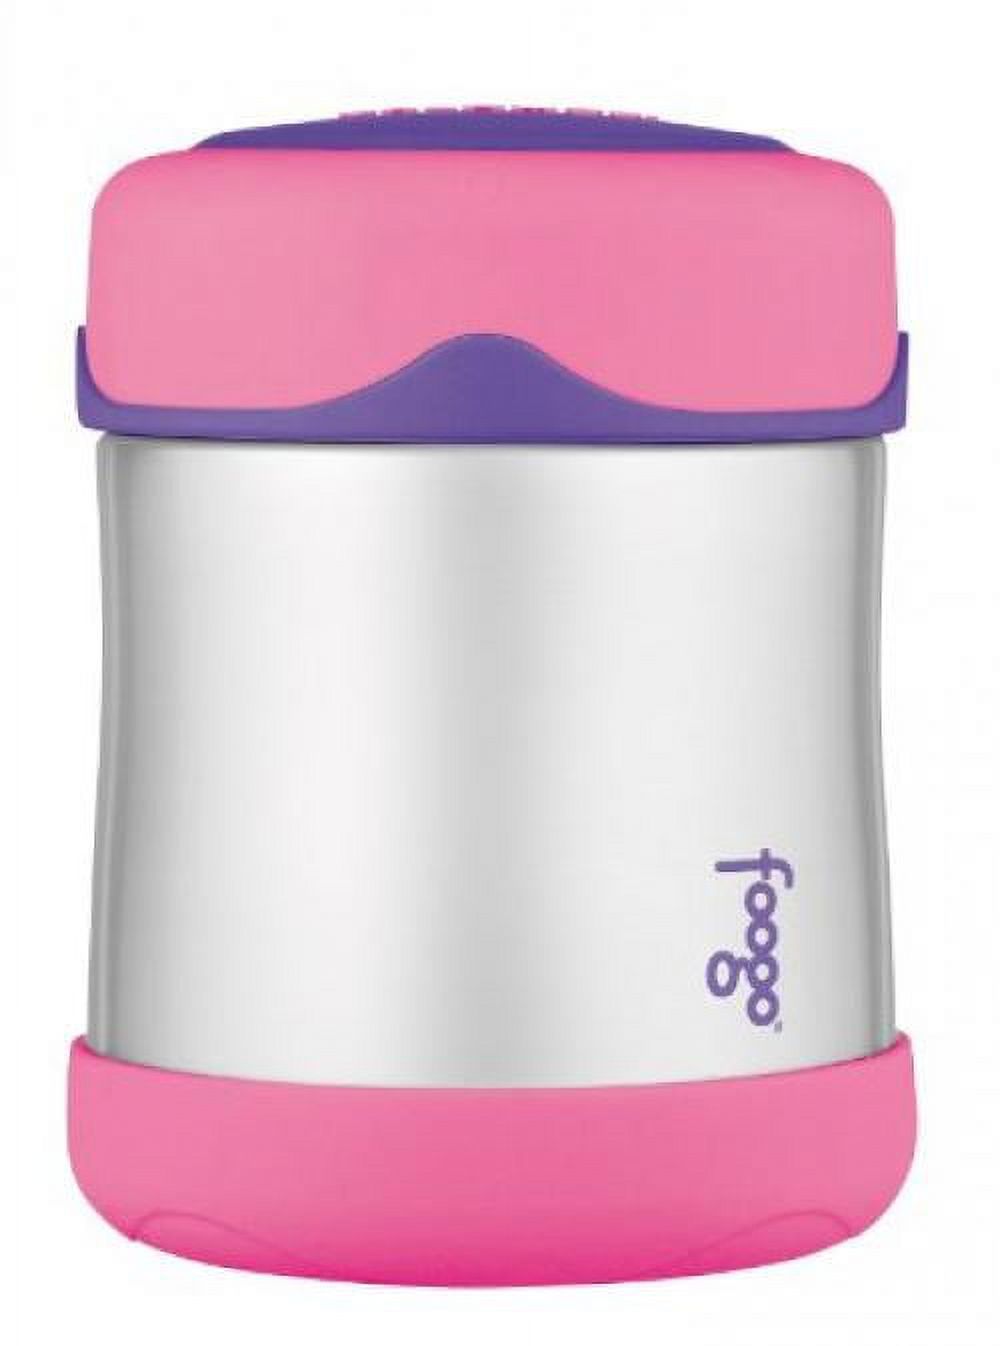 THERMOS FOOGO Vacuum Insulated Stainless Steel 10-Ounce Food Jar, Pink/Purple - image 1 of 3